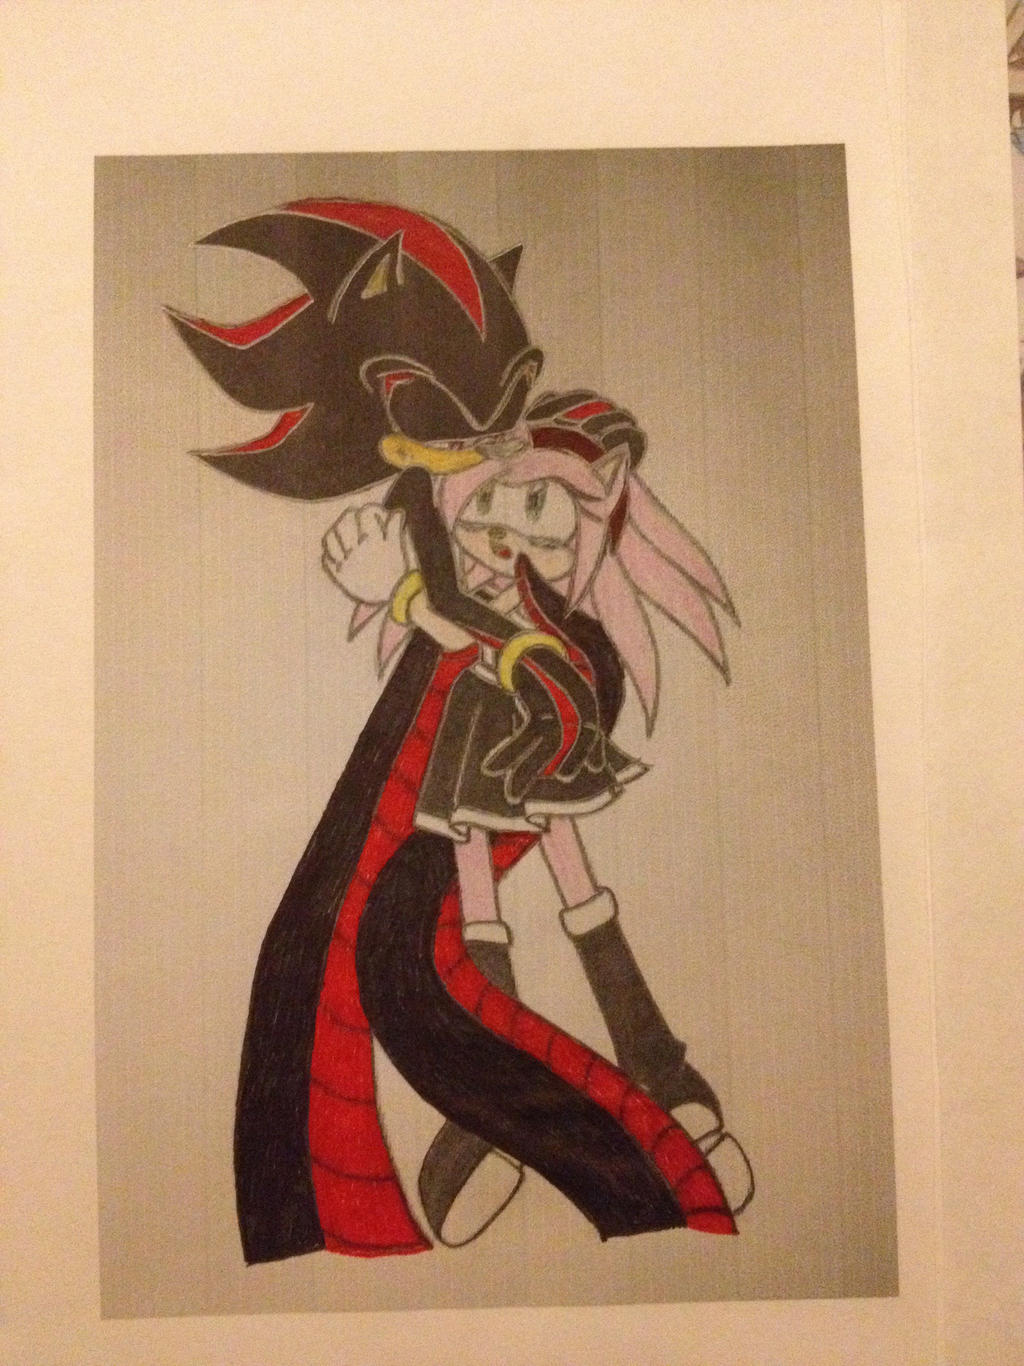 Shadow and Female Sonic kiss by PrincessShannon07 on DeviantArt